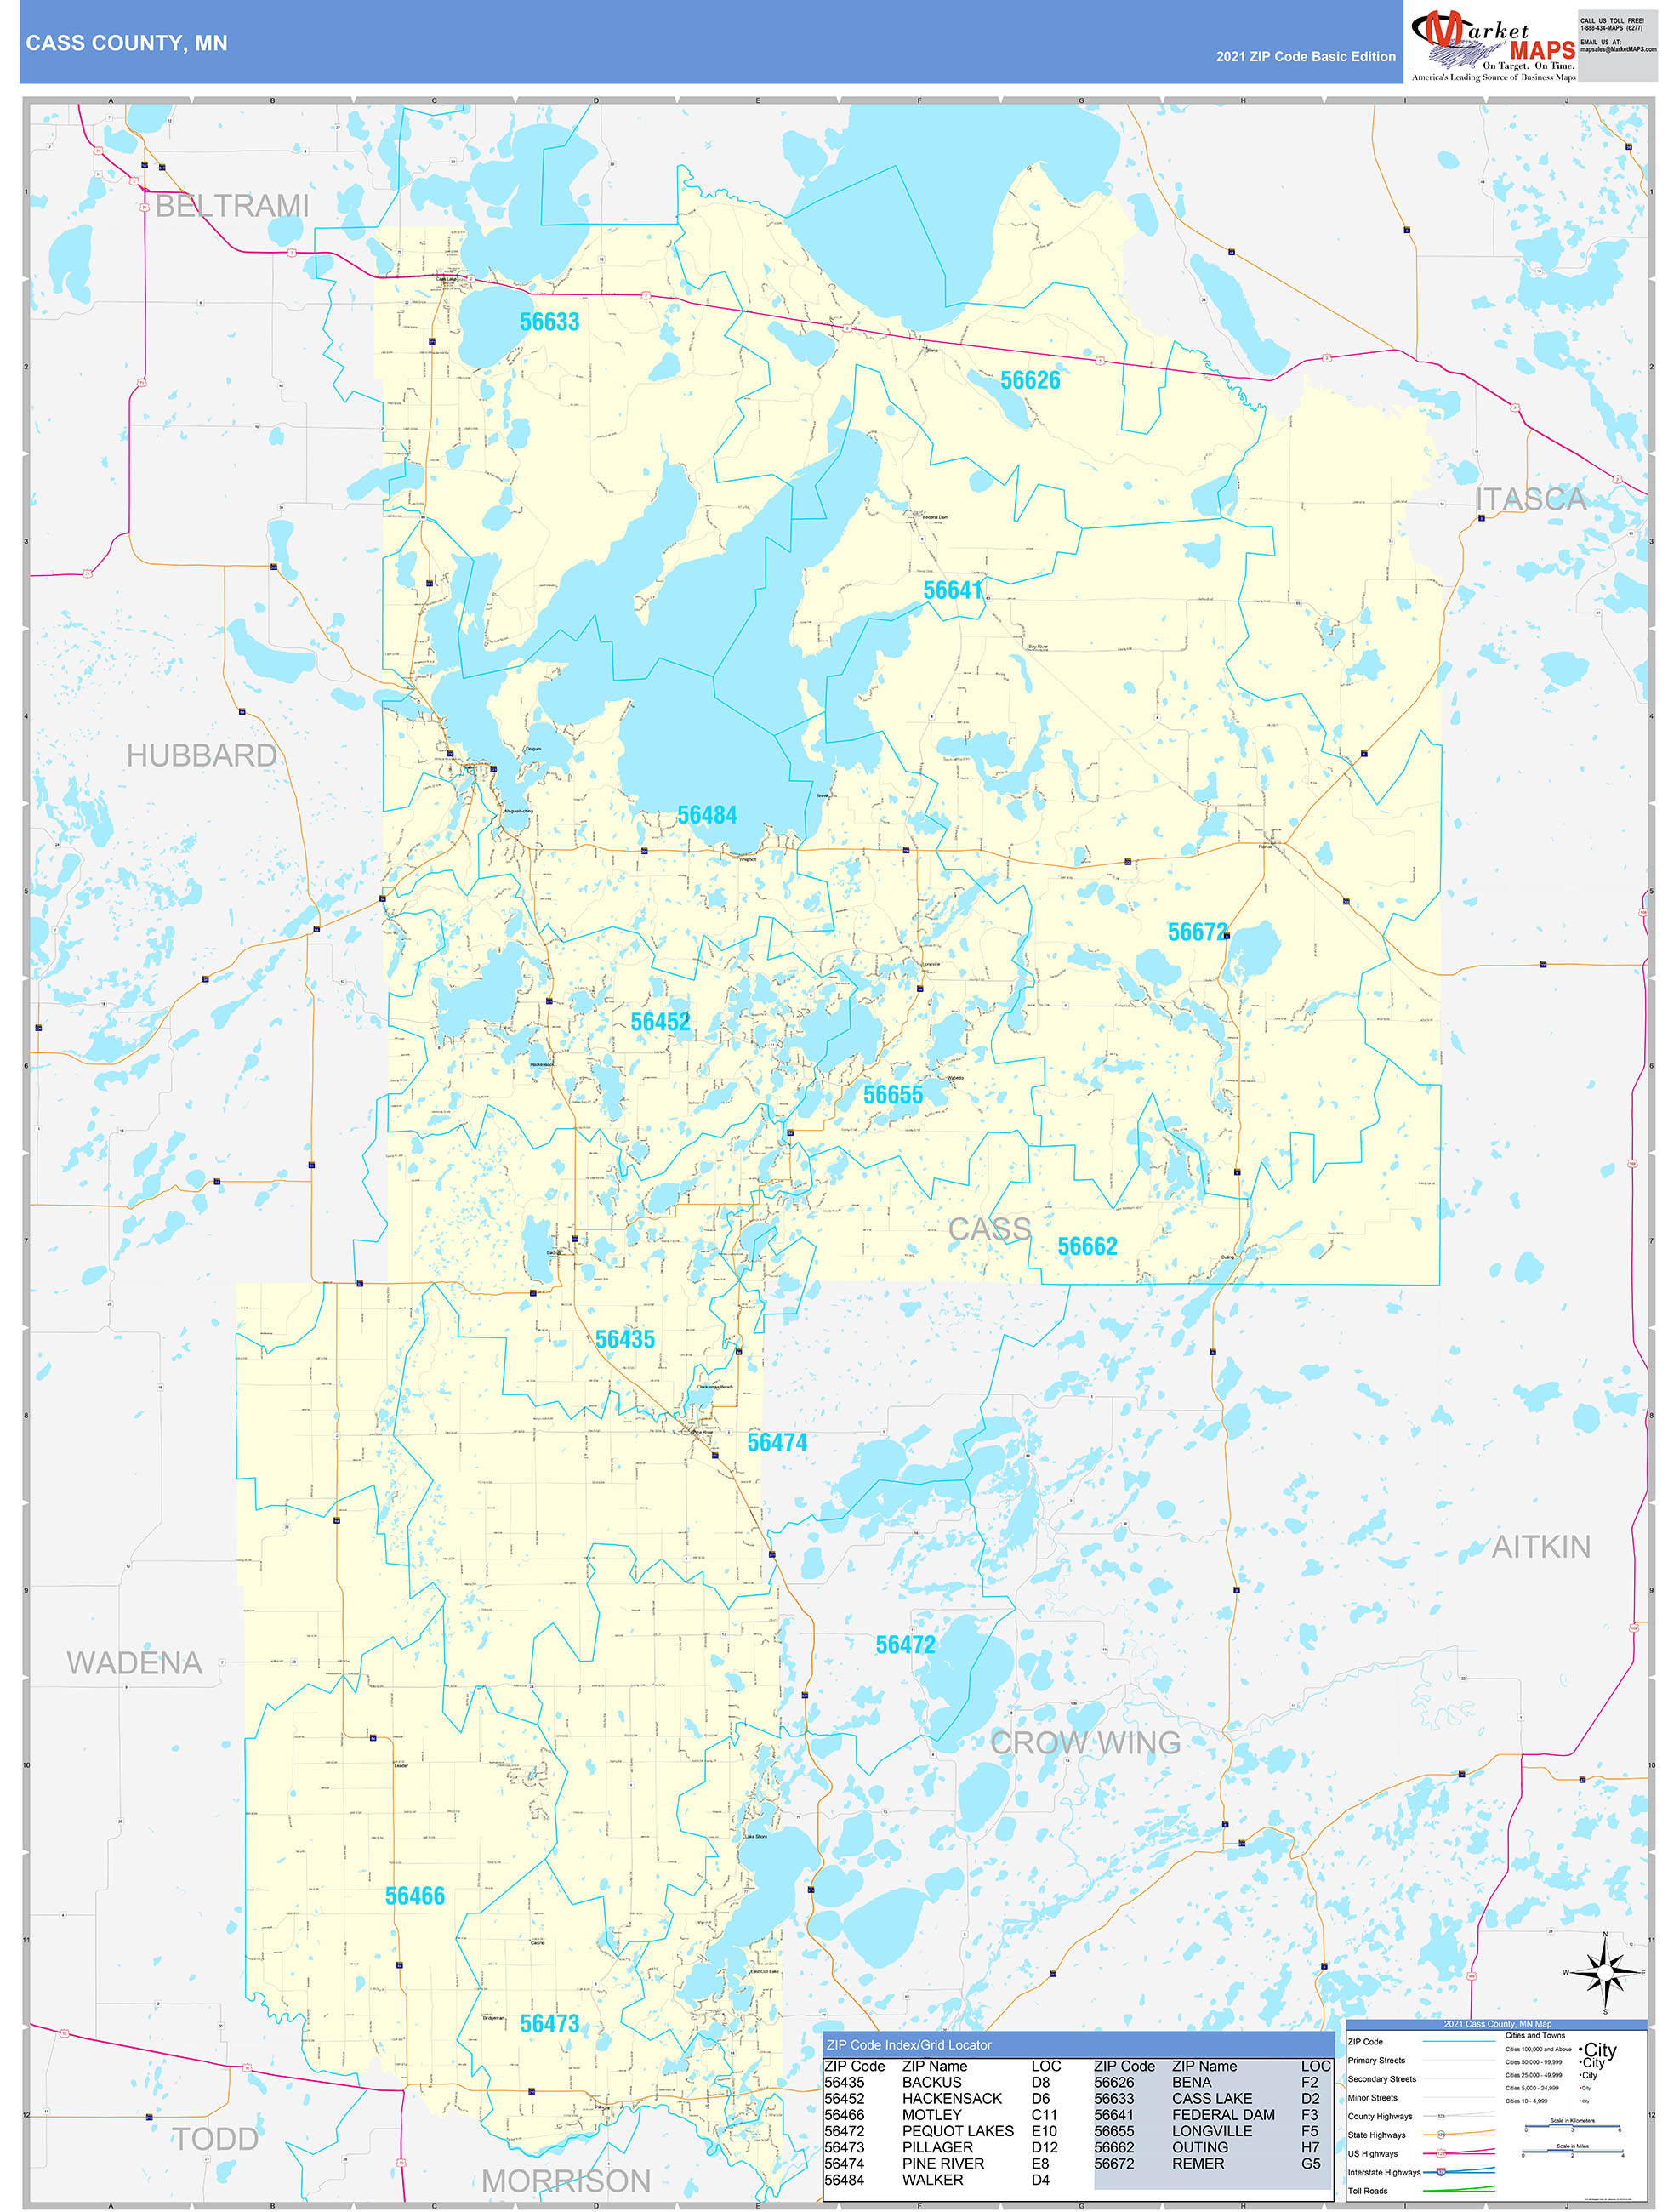 Cass County, MN Zip Code Wall Map Basic Style by MarketMAPS MapSales